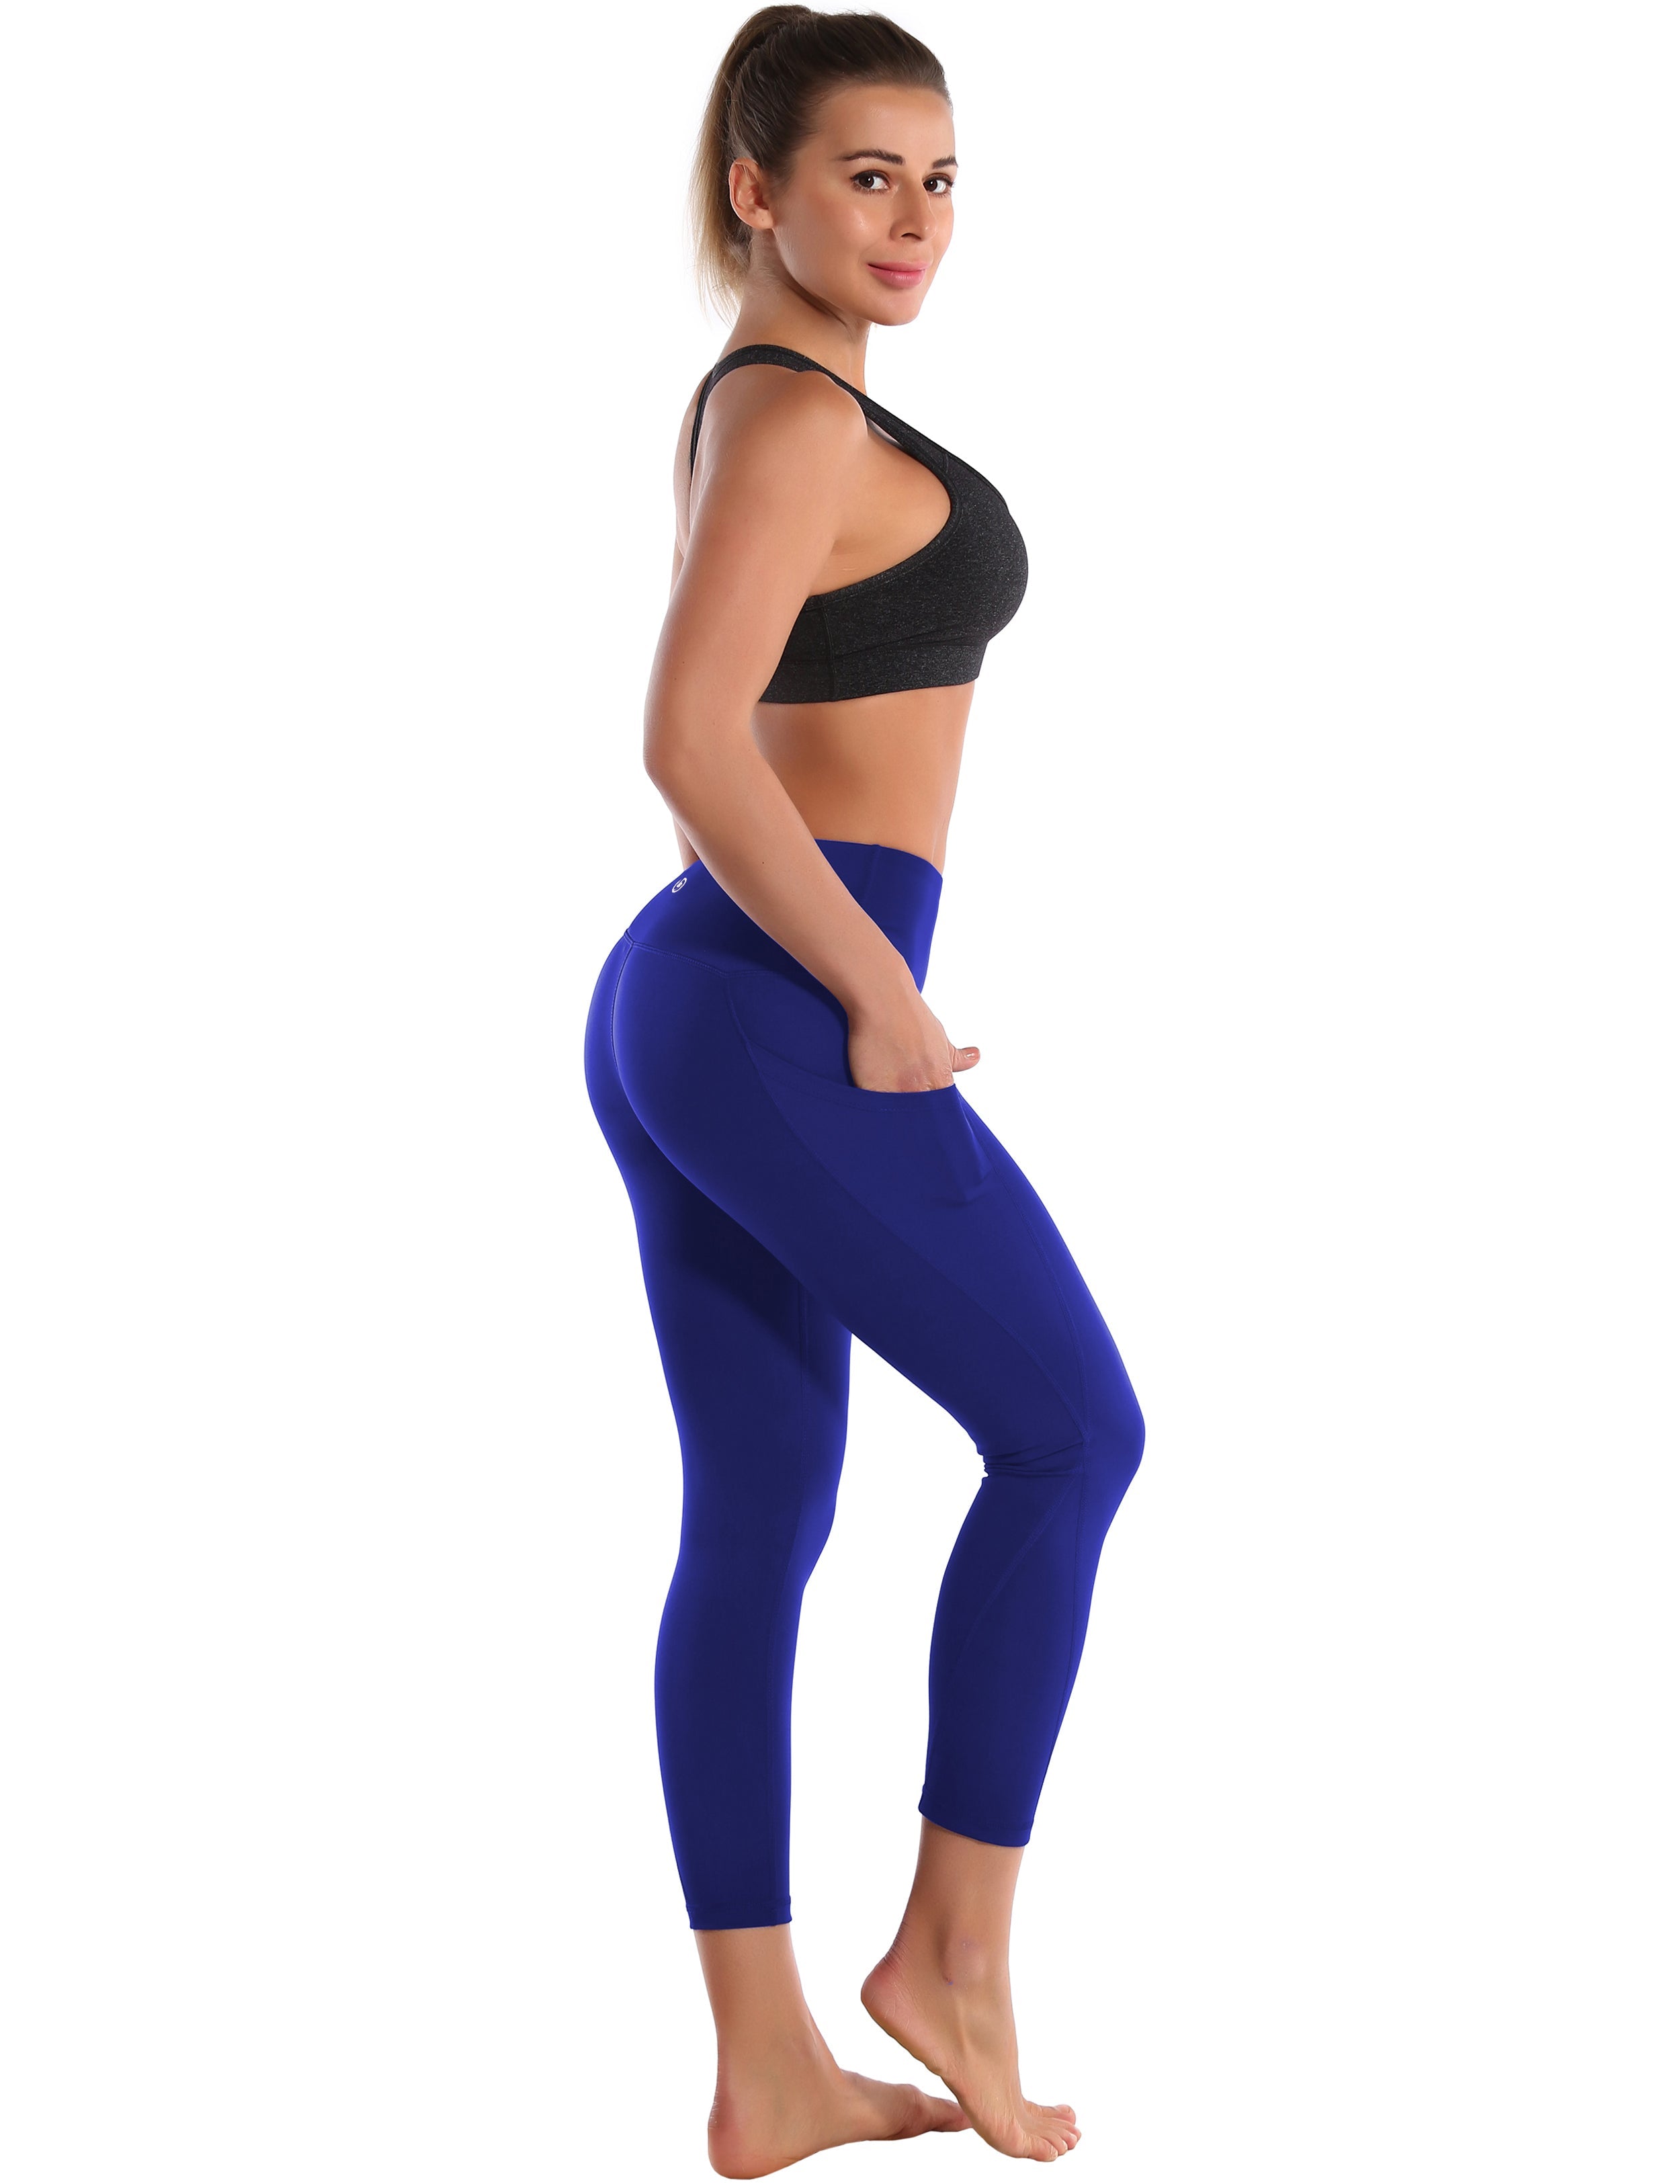 22" High Waist Side Pockets Capris navy 75%Nylon/25%Spandex Fabric doesn't attract lint easily 4-way stretch No see-through Moisture-wicking Tummy control Inner pocket